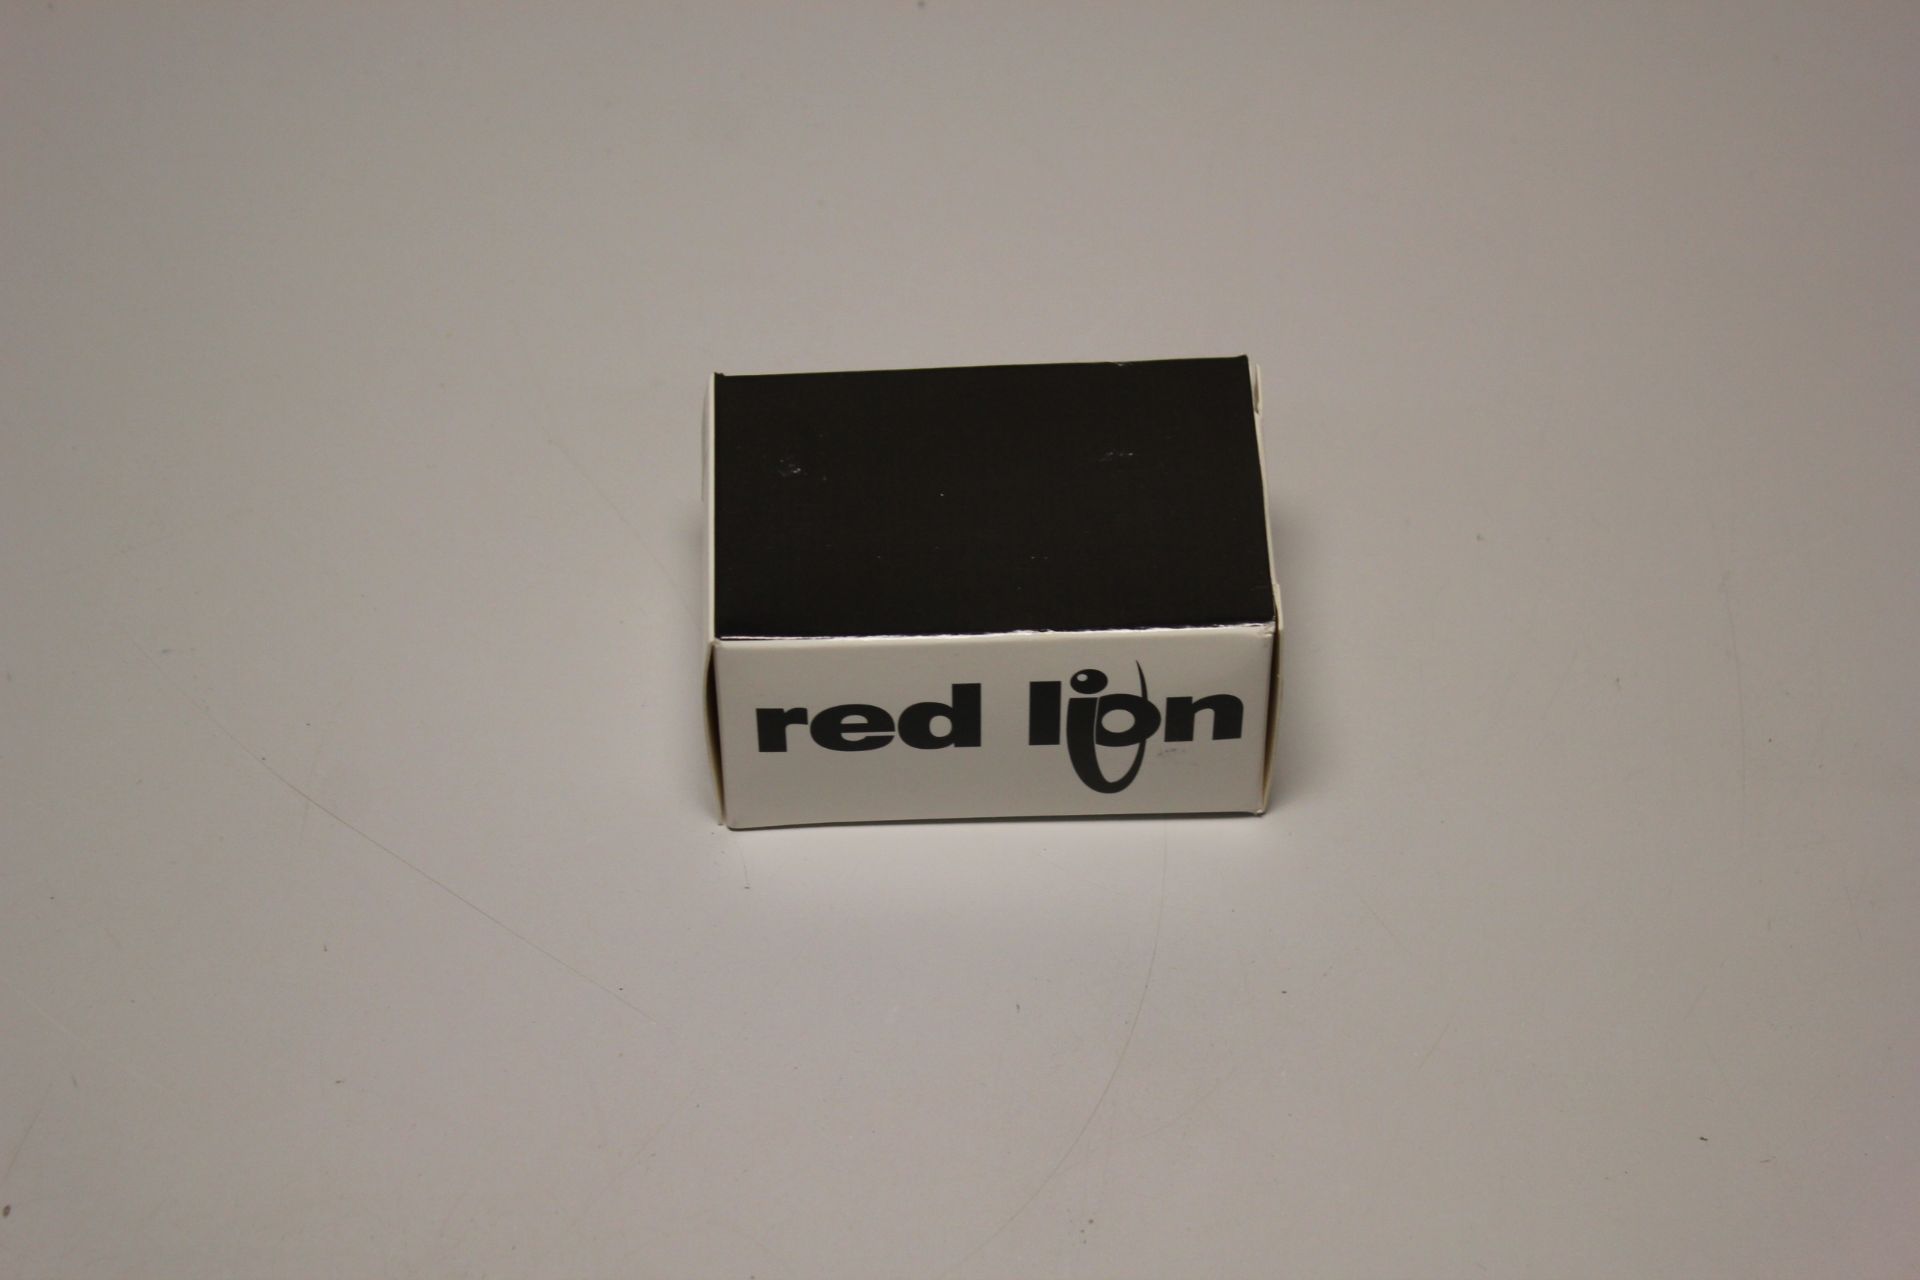 NEW RED LION SERIAL COMMUNICTION PLUG IN MODULE